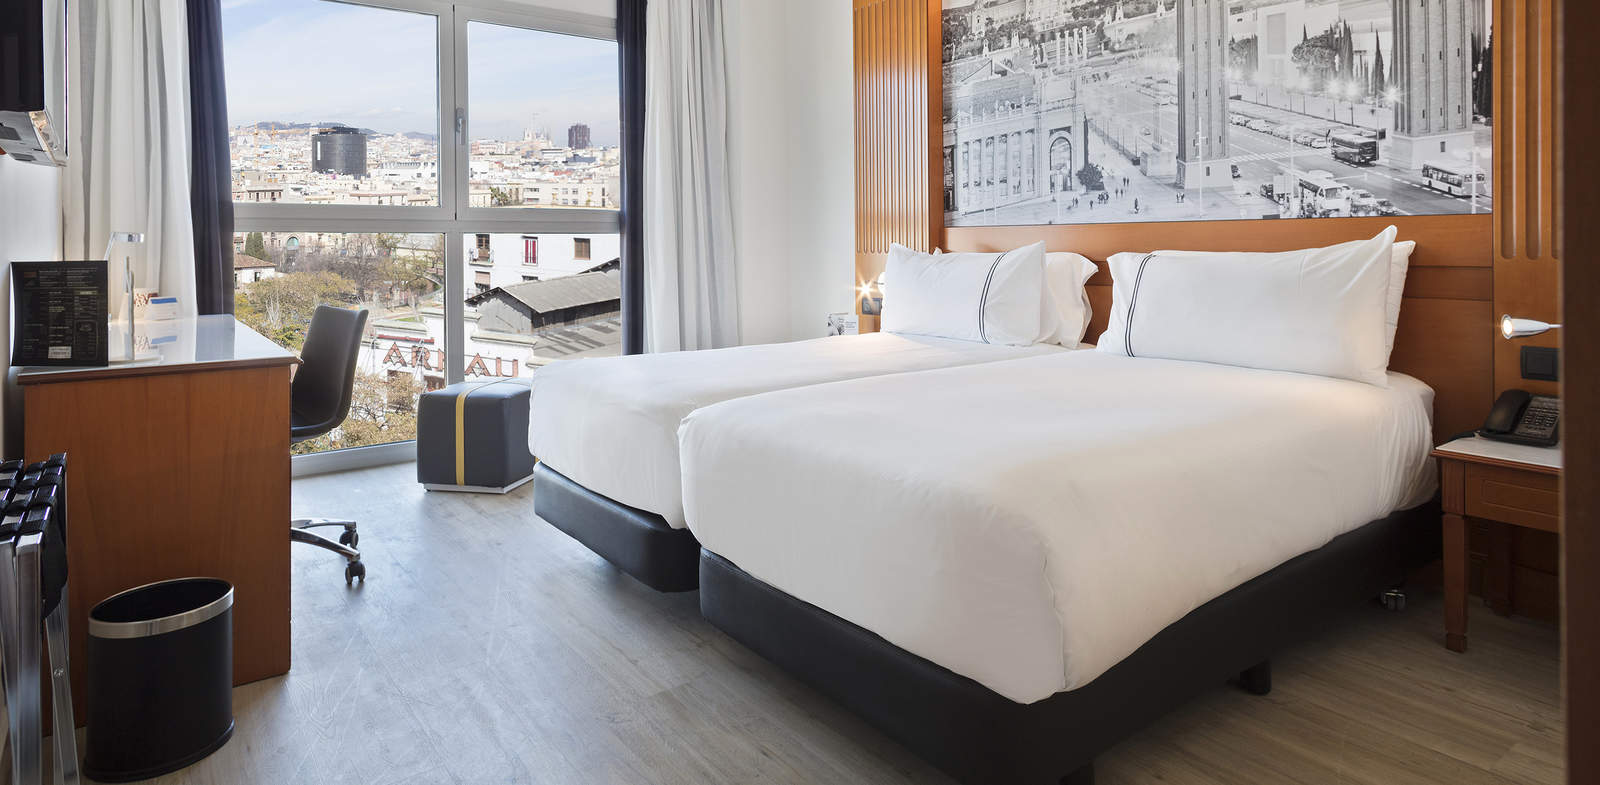 101aHotelBarcelonaApolo_Affiliated-Standard-Room-Twin_D.jpg